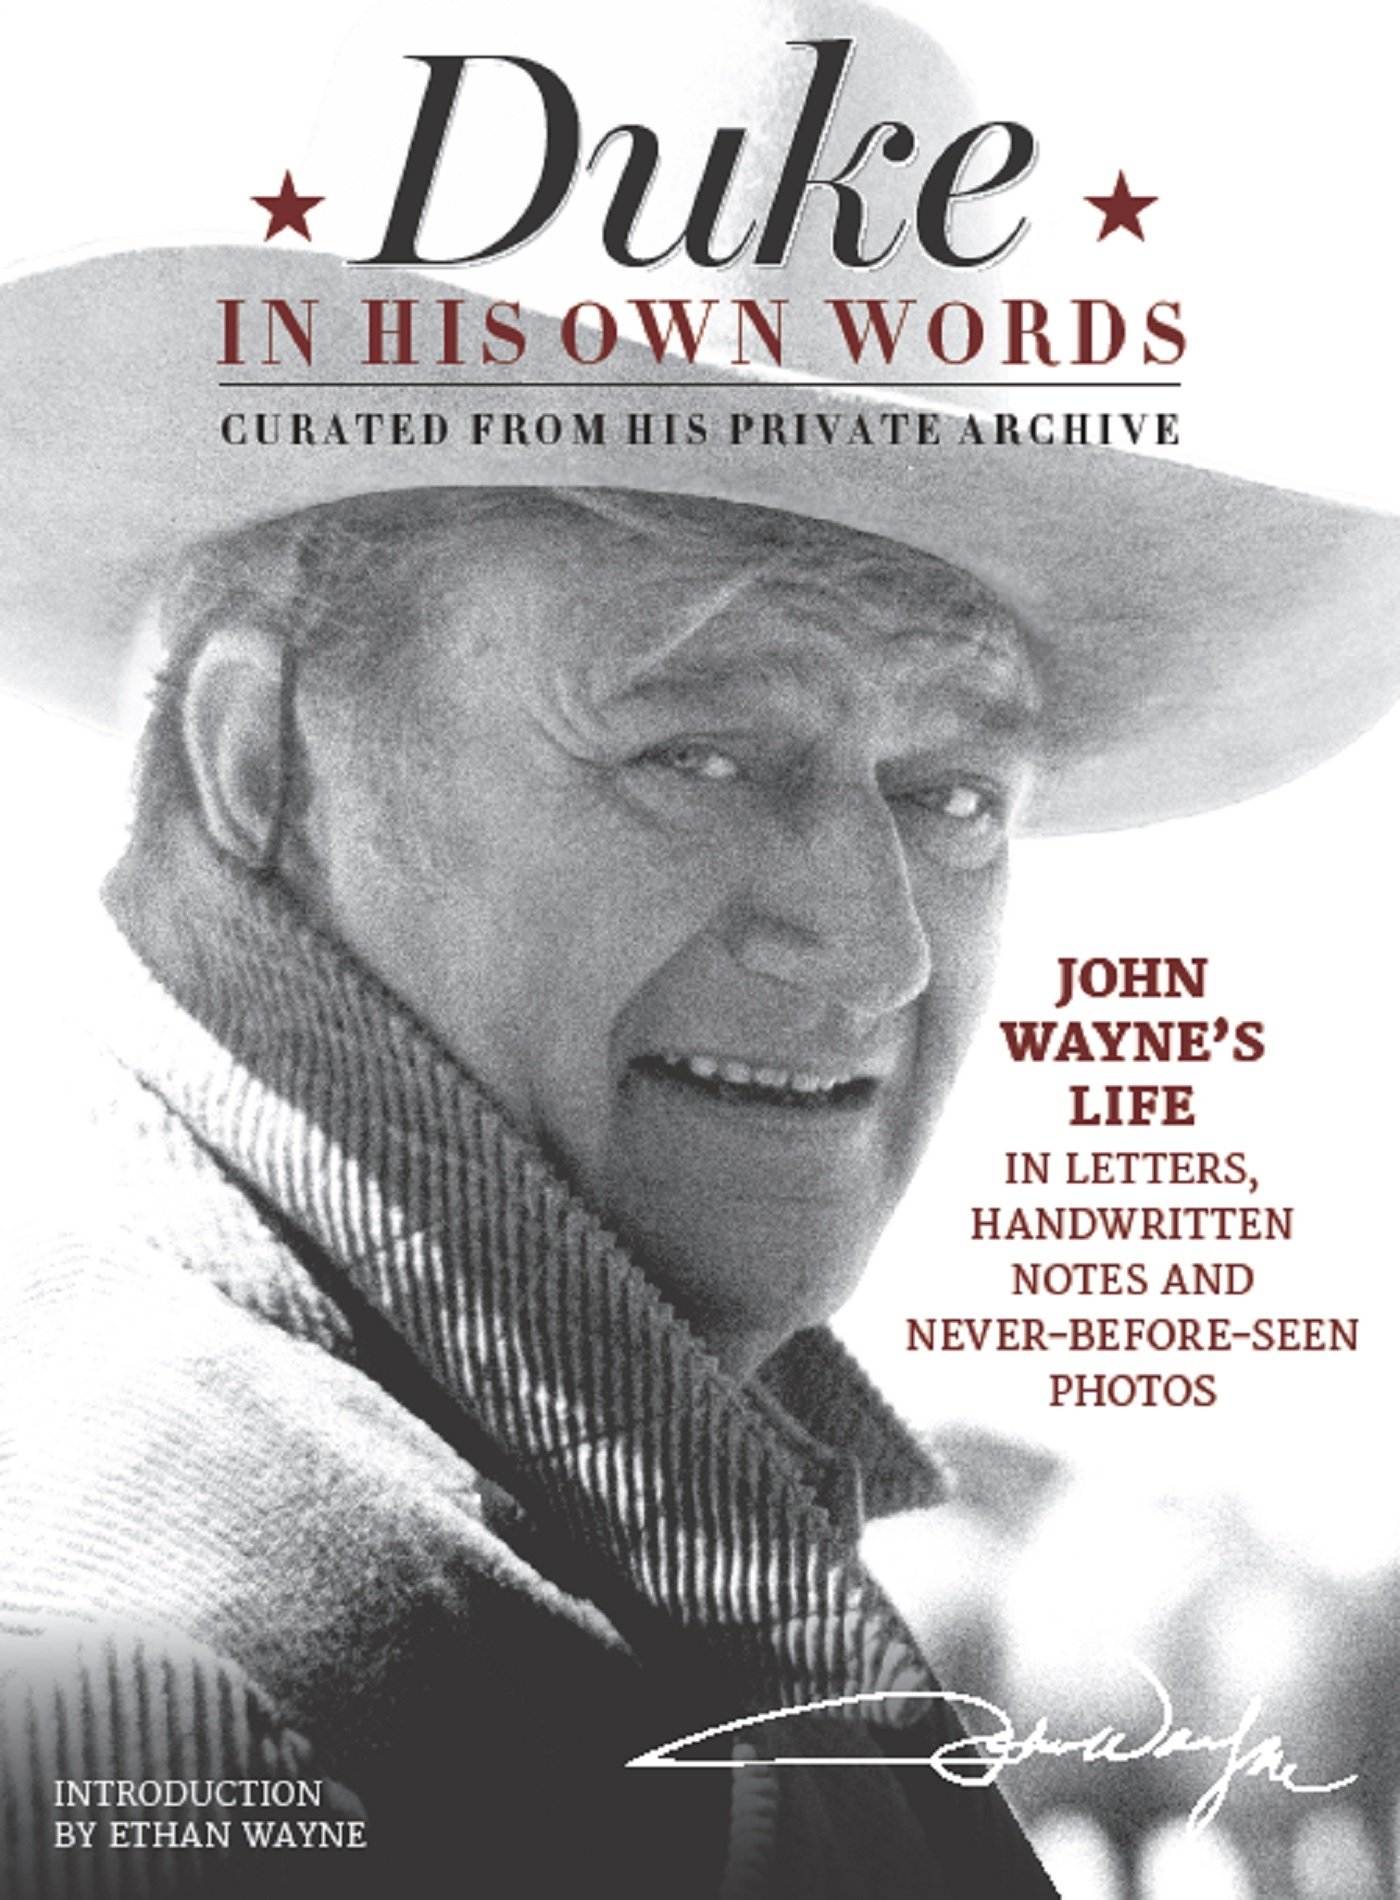 Book Cover Duke in His Own Words: John Wayne's Life in Letters, Handwritten Notes and Never-Before-Seen Photos Curated from His Private Archive